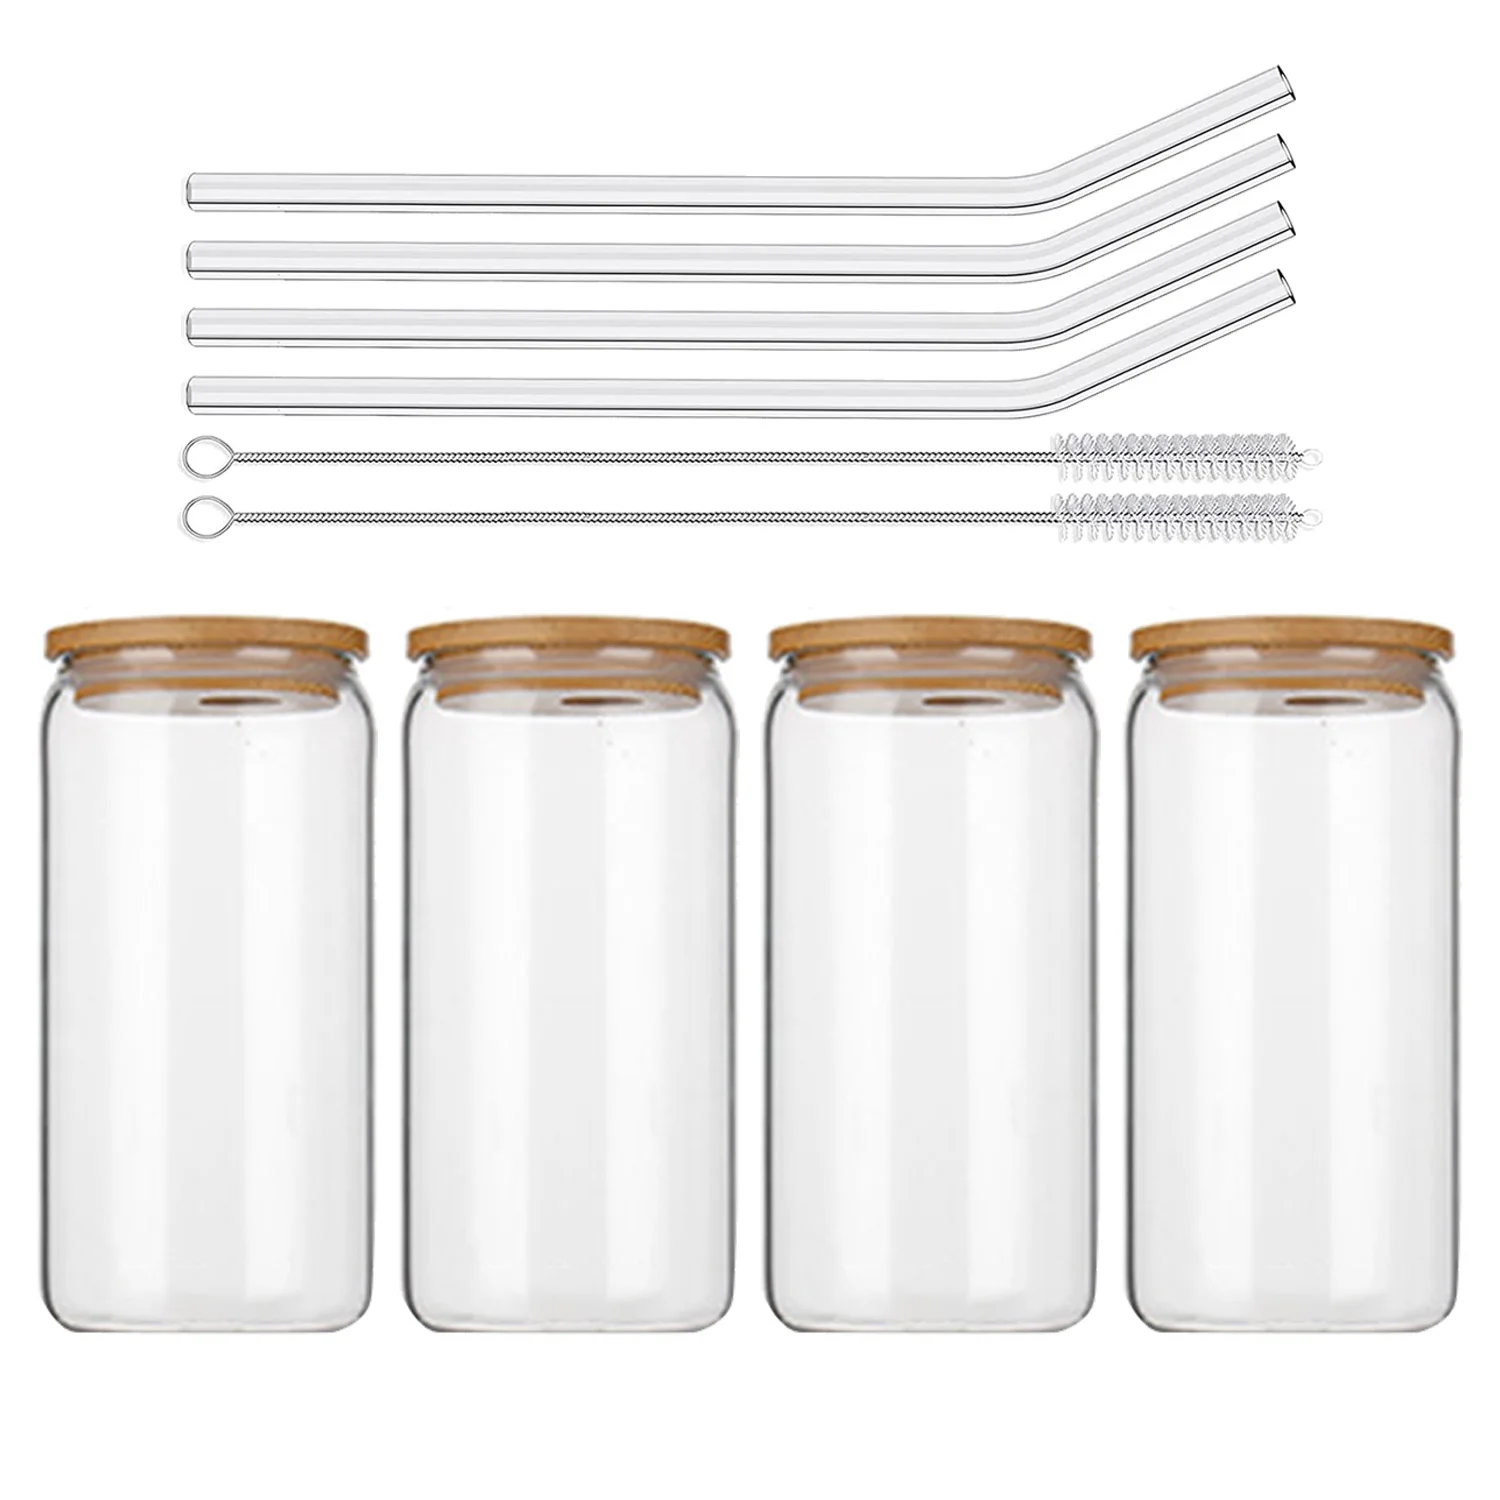 https://ae01.alicdn.com/kf/S106605262157429fb37c5e50d269d373t/Drinking-Glasses-with-Bamboo-Lids-and-Glass-Straw-4Pcs-Set-16Oz-Can-Shaped-Glass-Cups-Beer.jpg